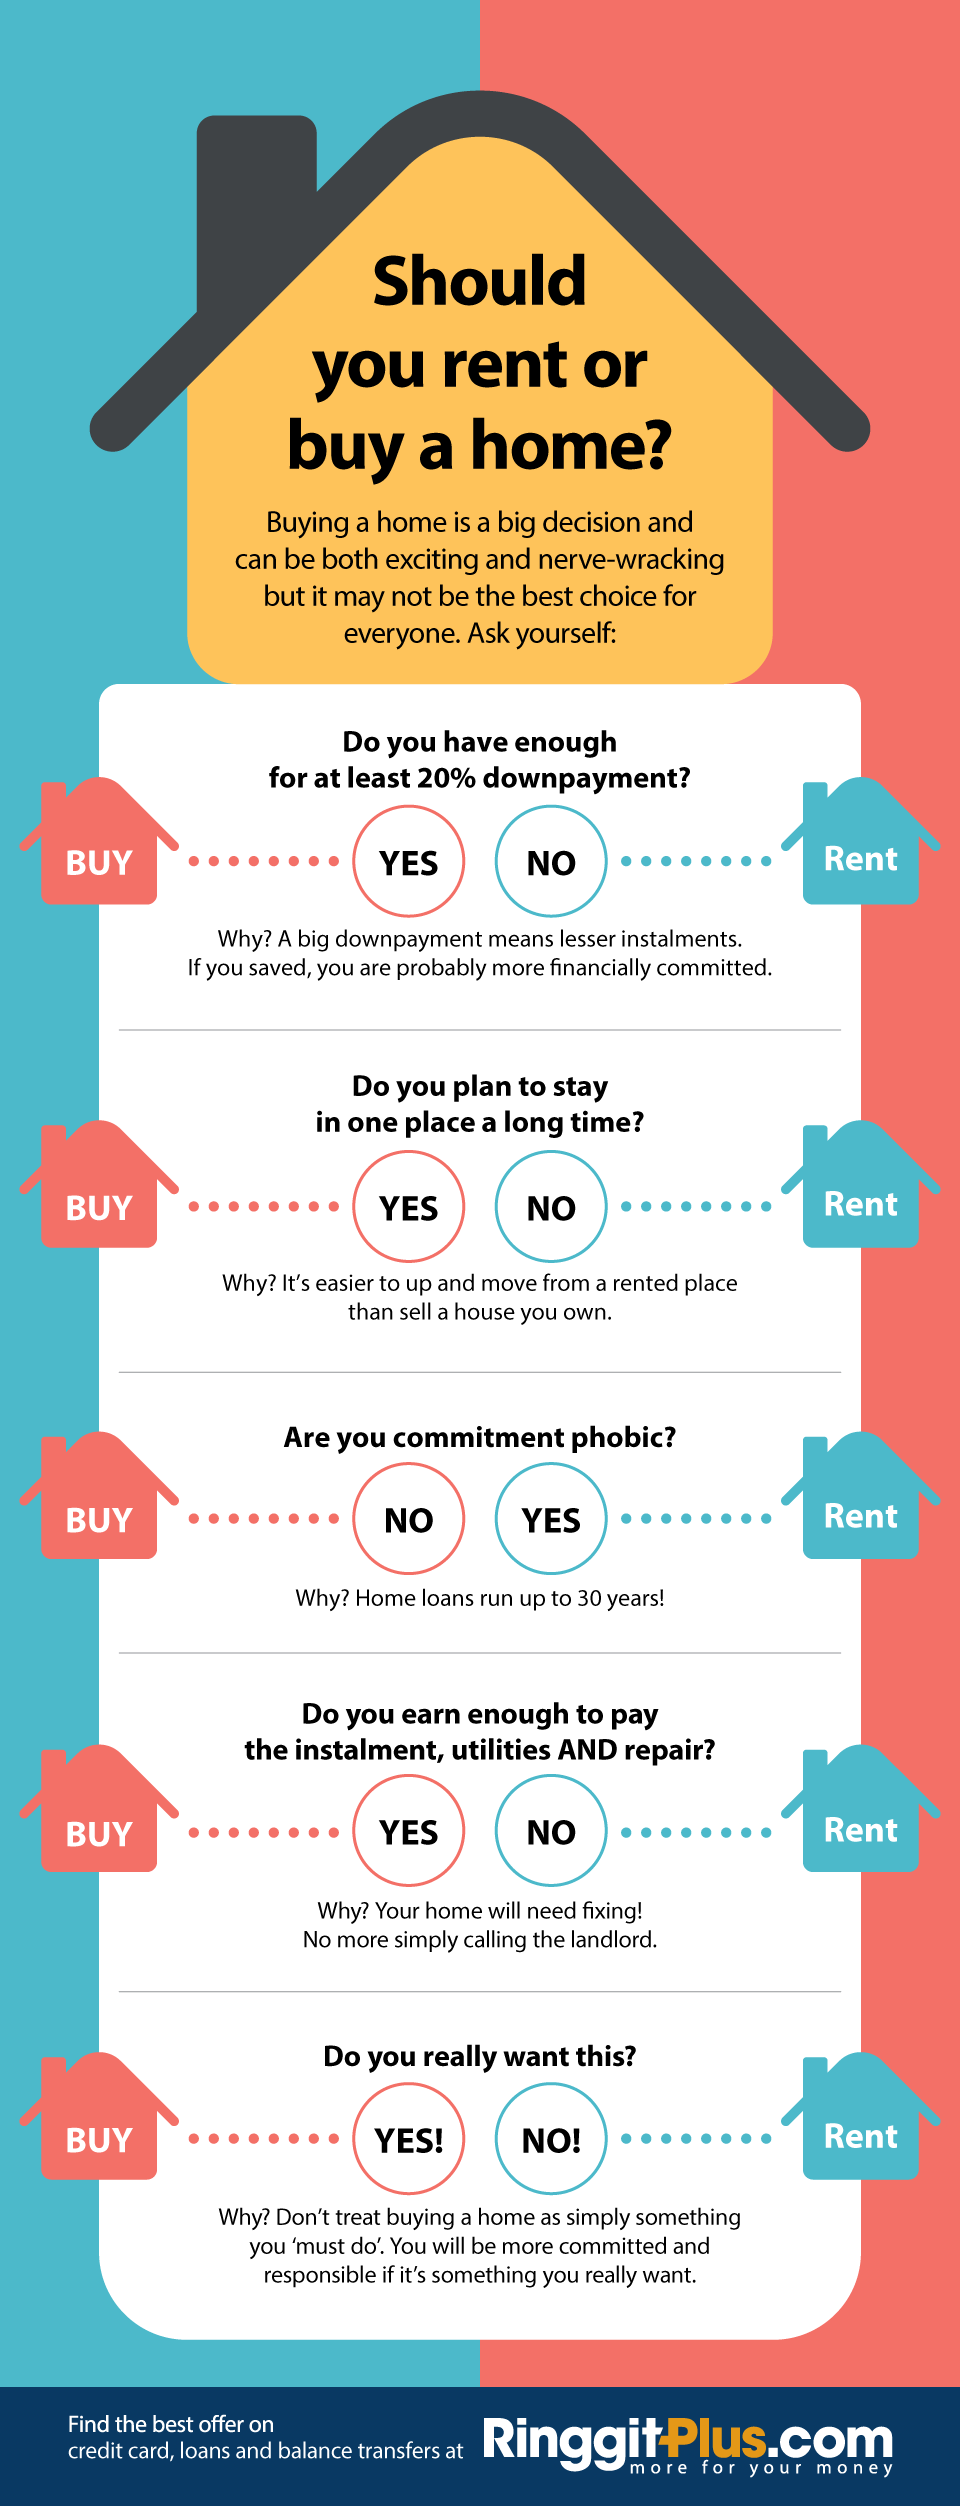 Should you rent or buy a home?